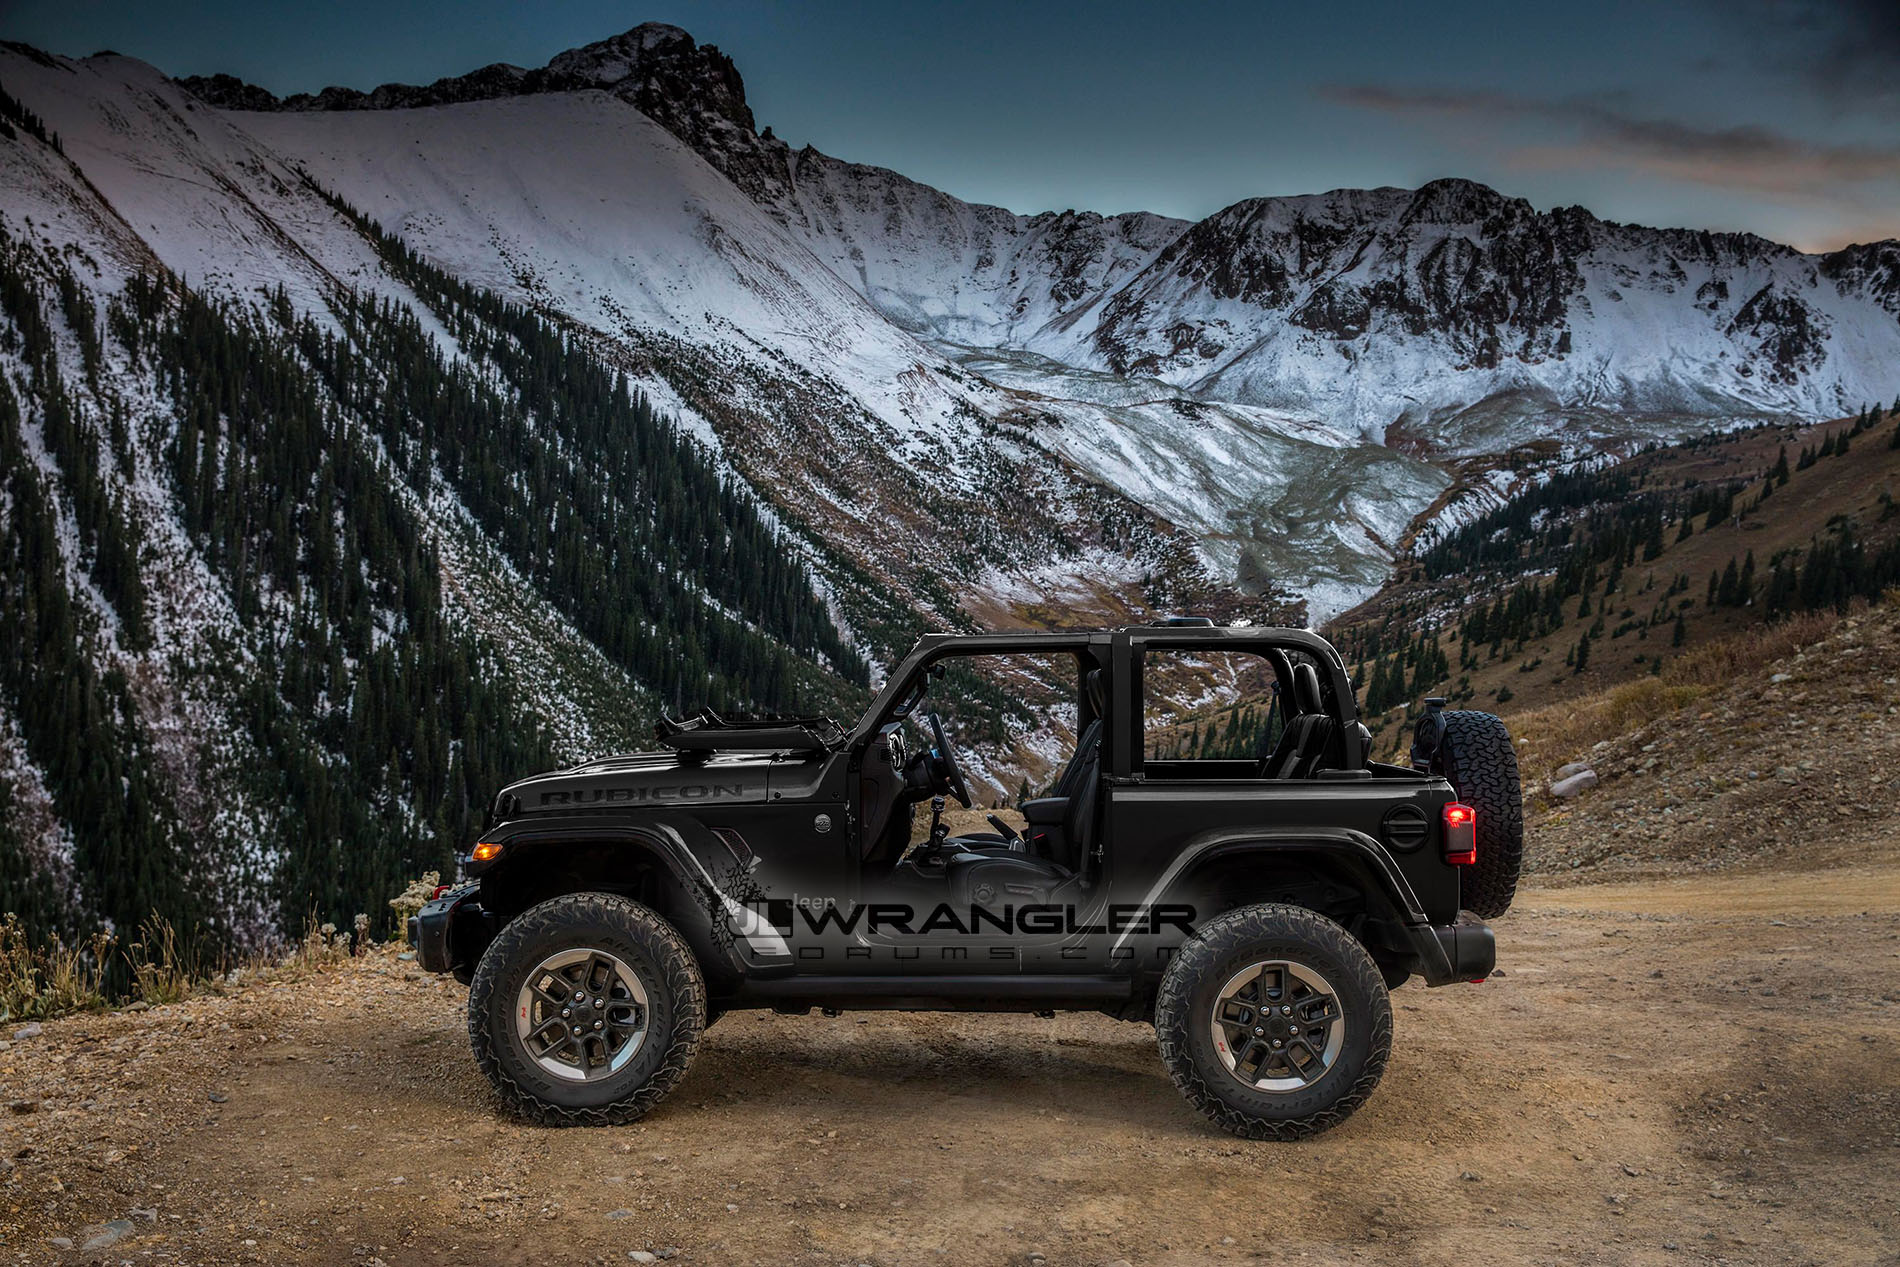 2018 Jeep Wrangler Leaked Color Options Include "Punk'n," "Mojito," and "Nacho" - autoevolution